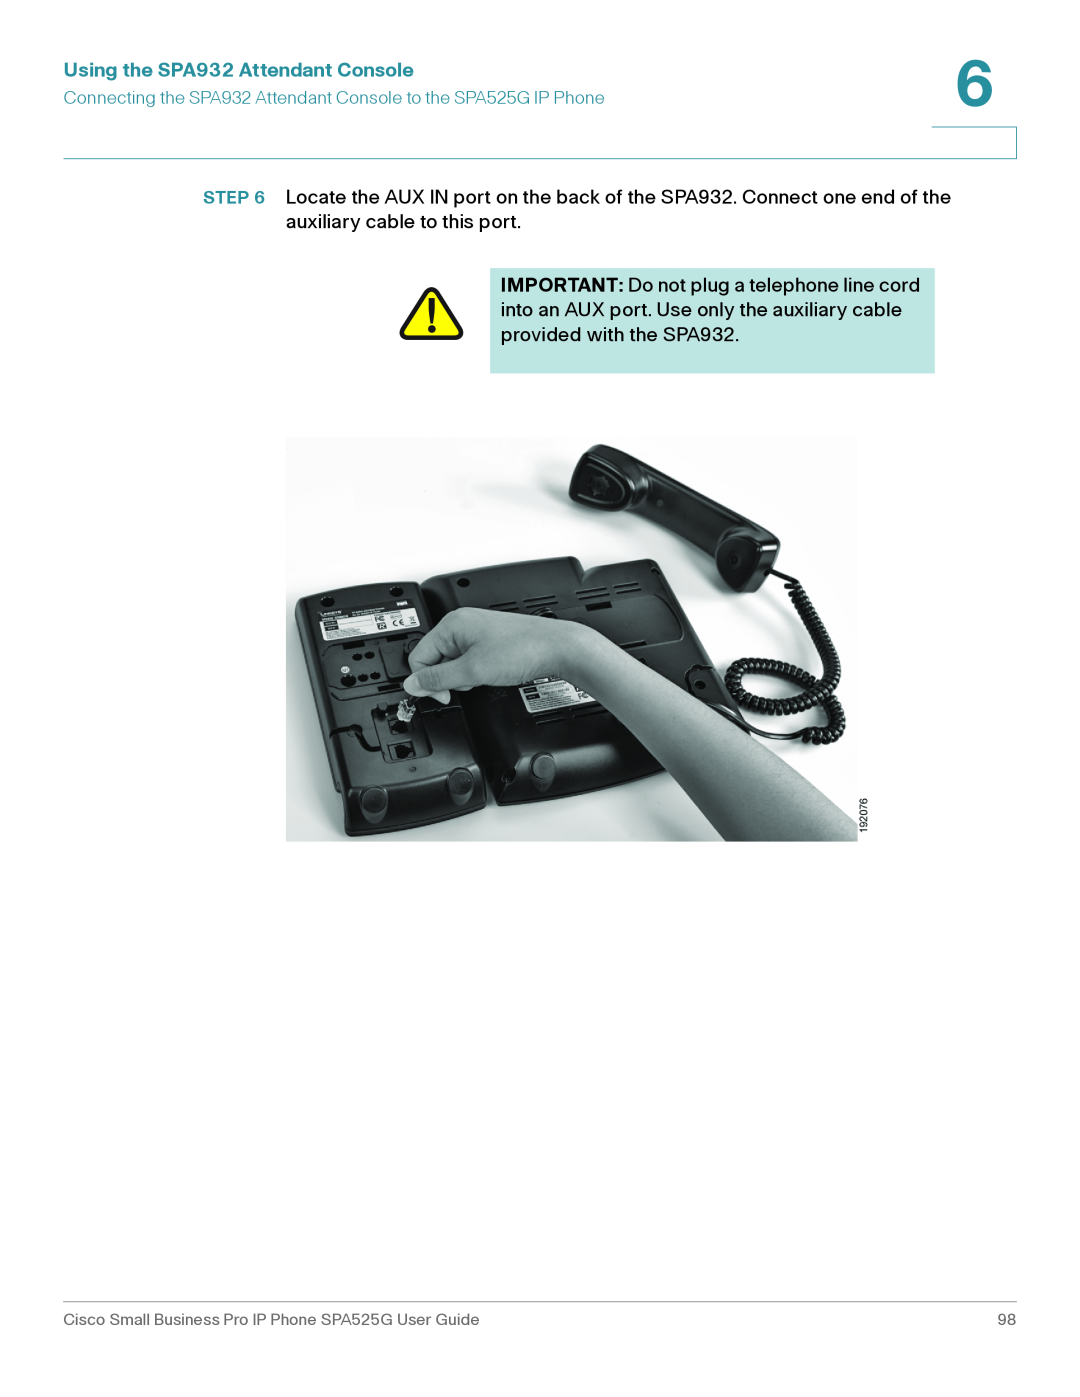 Cisco Systems SPA525G manual Using the SPA932 Attendant Console, provided with the SPA932 